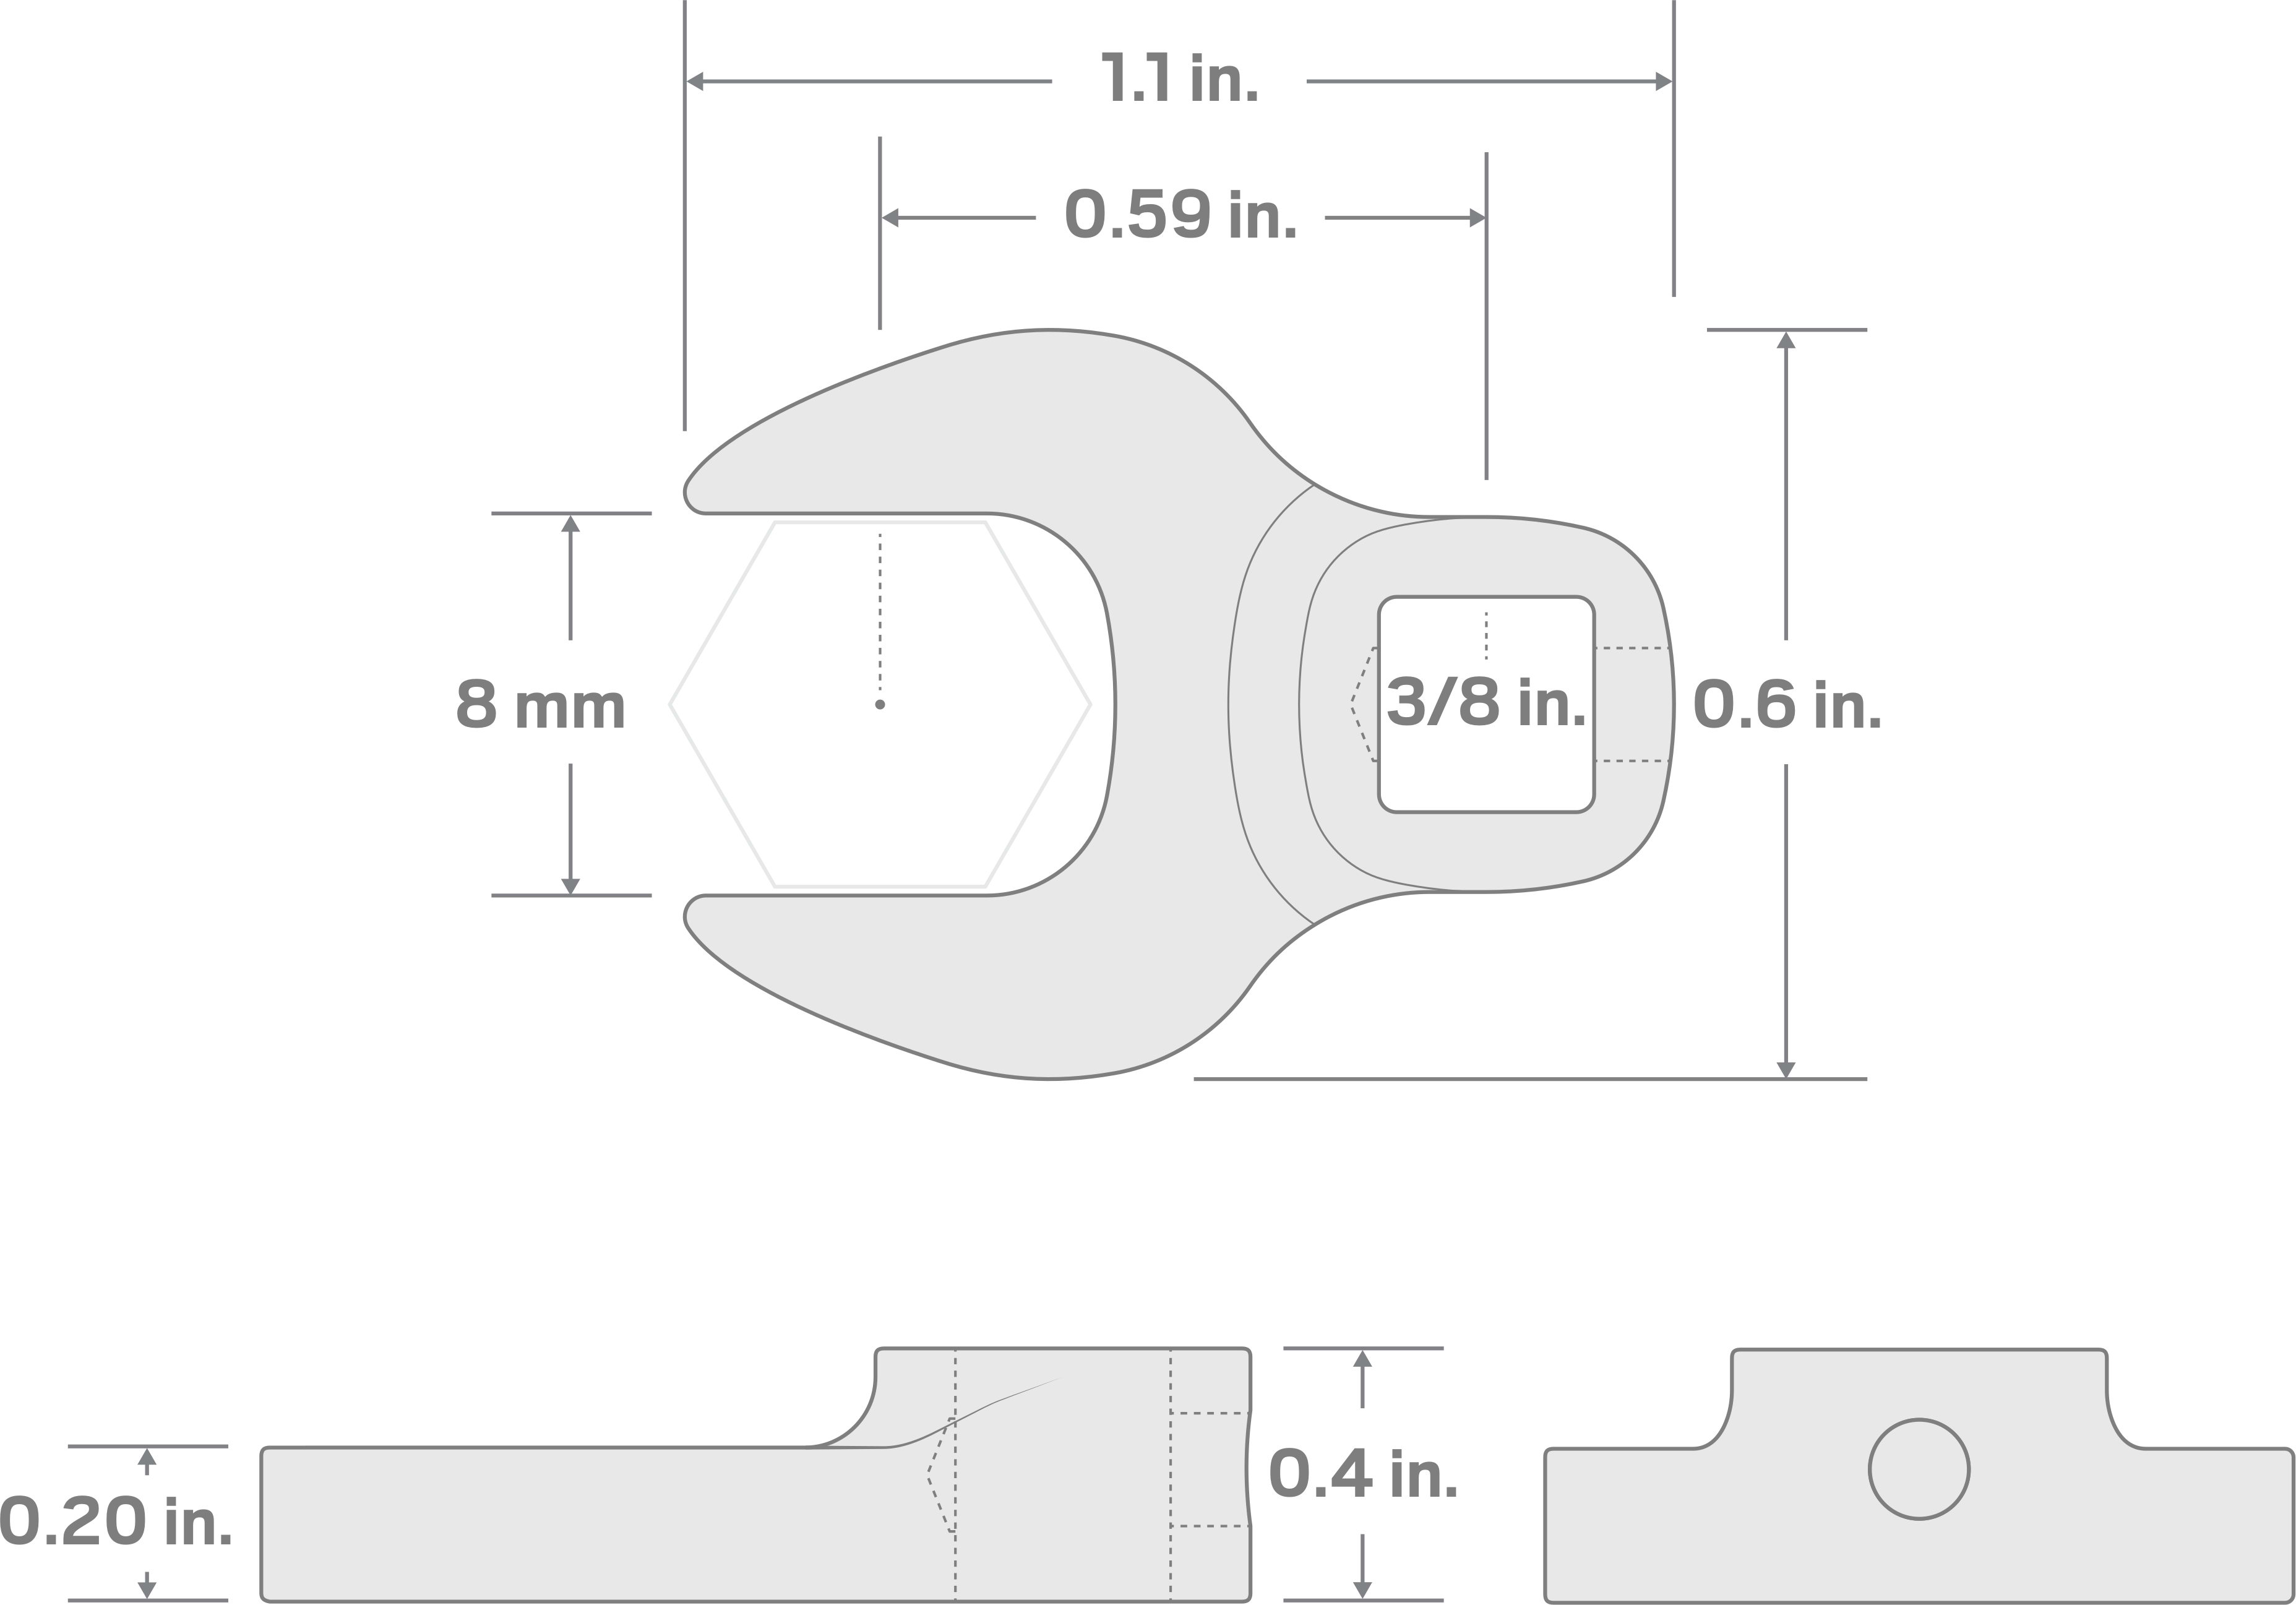 Specs for 3/8 Inch Drive x 8 mm Crowfoot Wrench